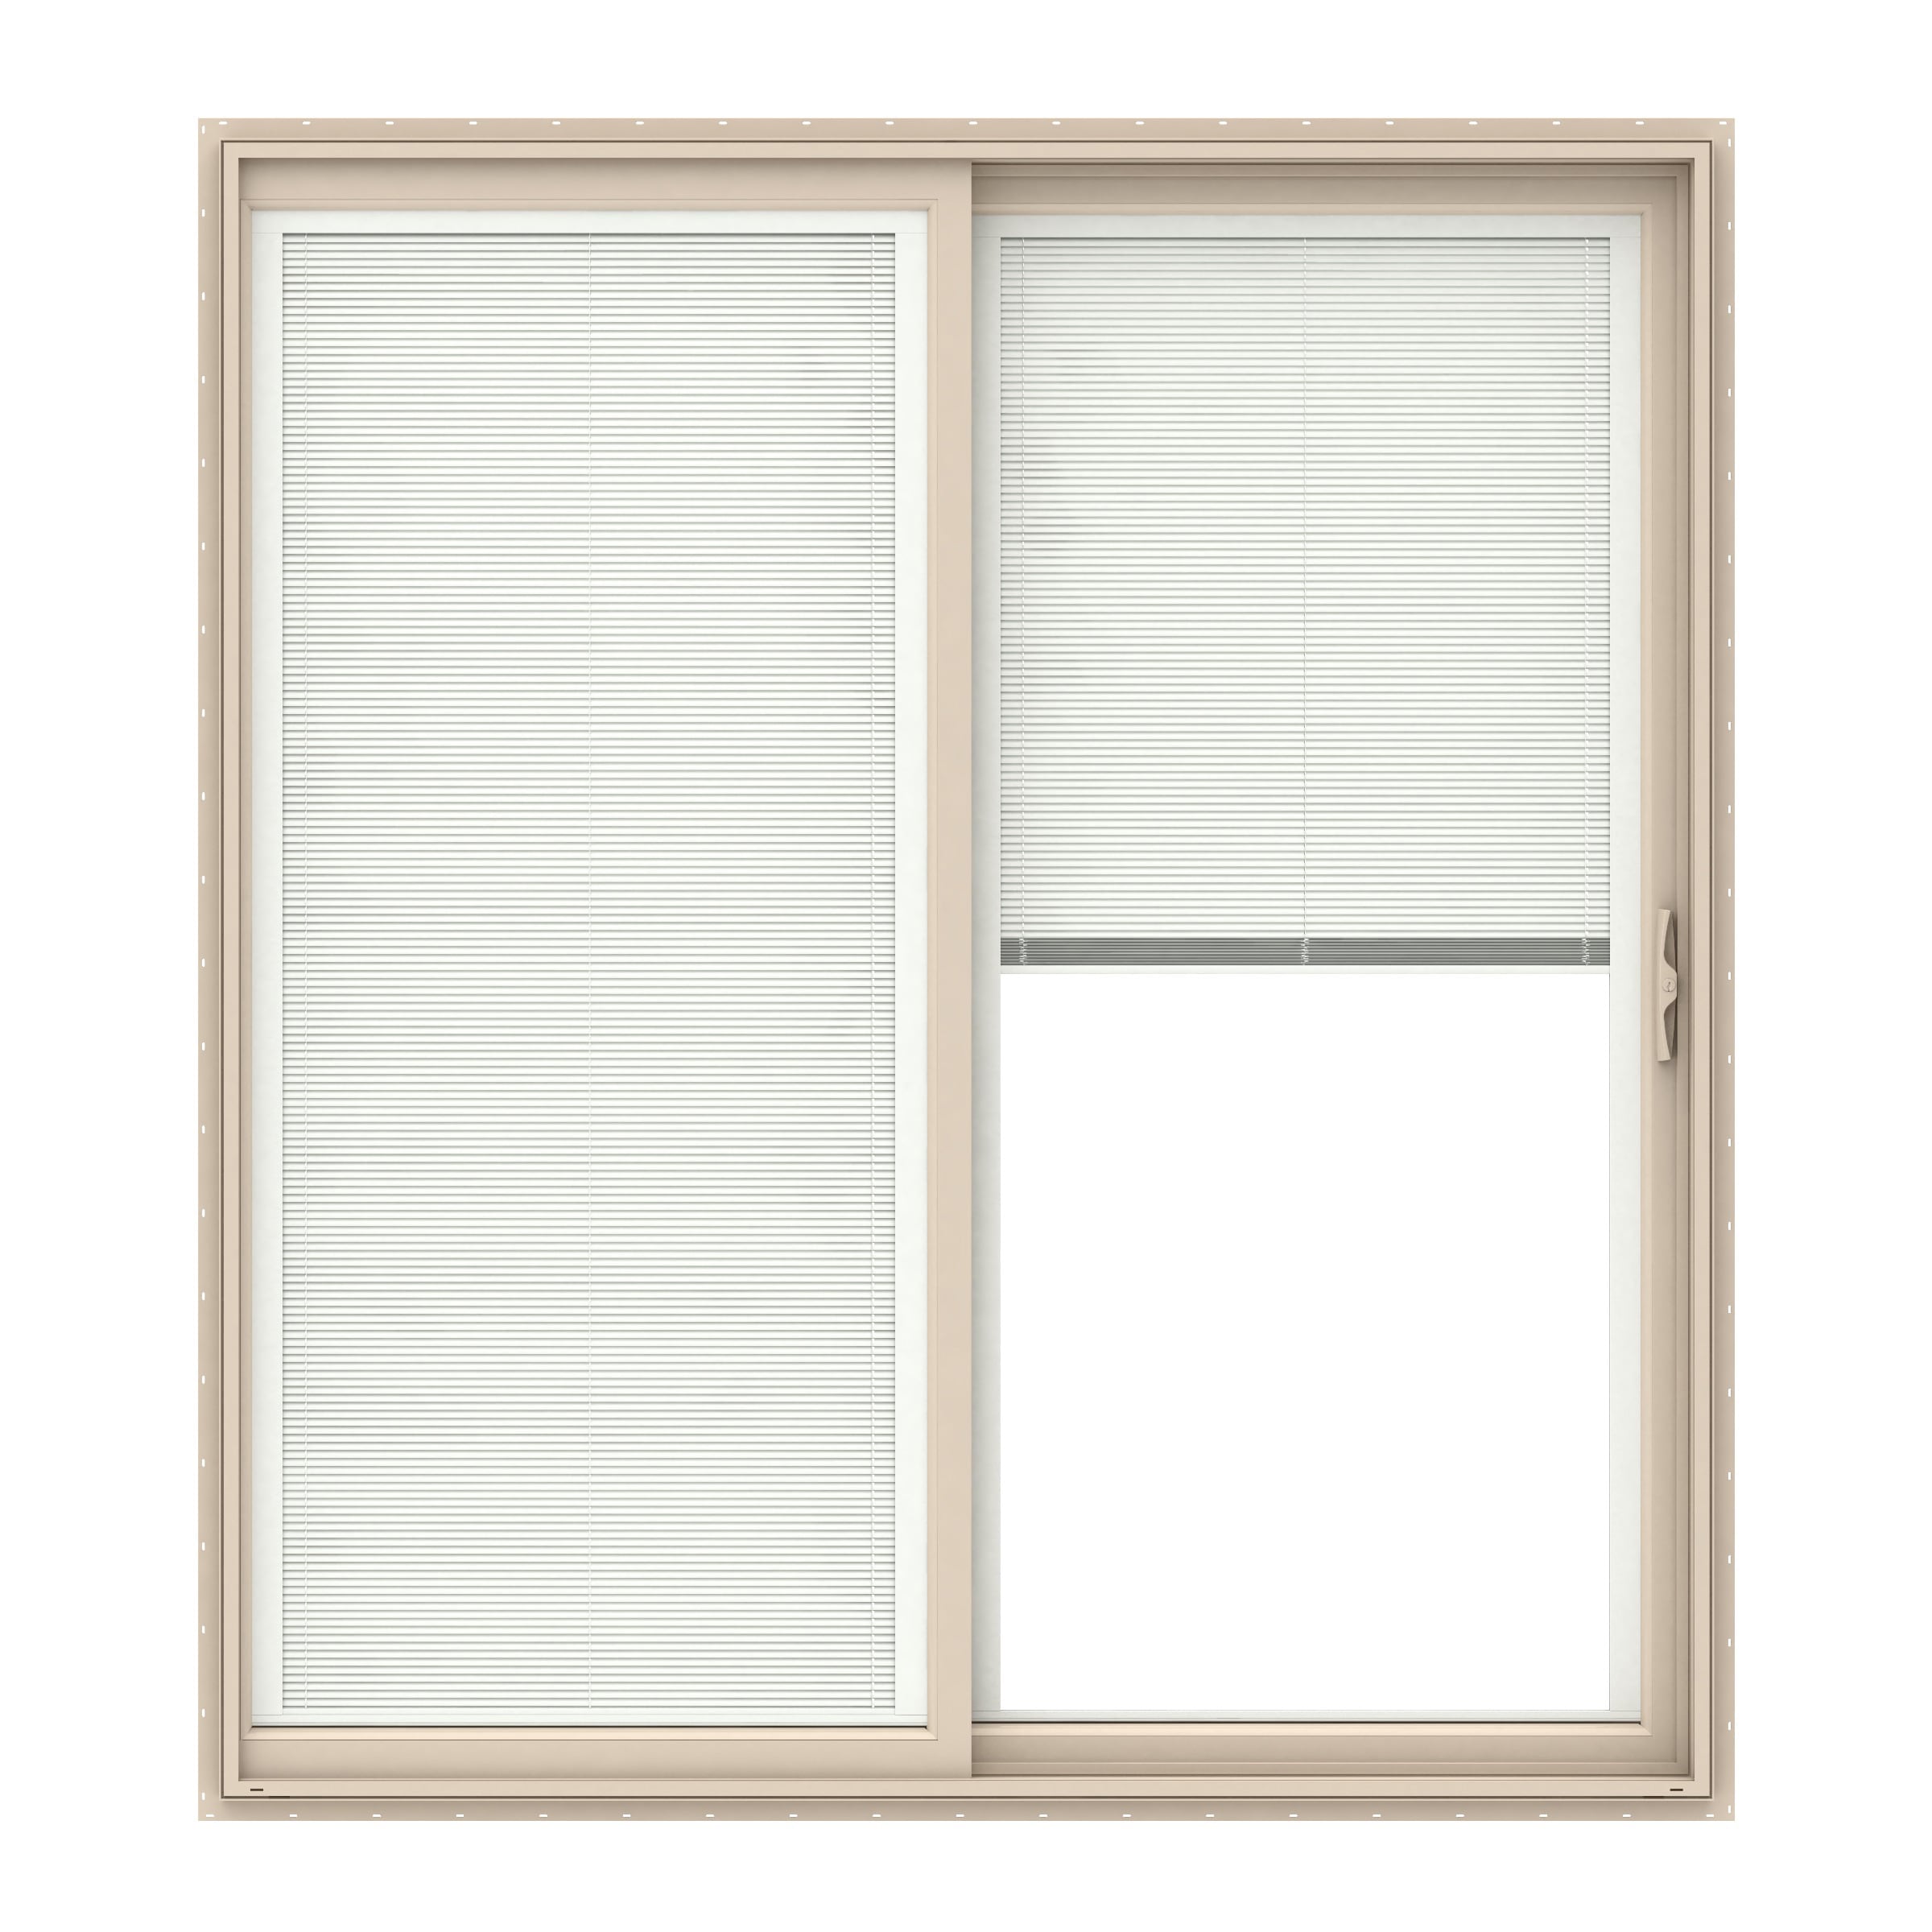 150 Series West 60-in x 80-in Low-e Blinds Between The Glass Almond Vinyl Sliding Right-Hand Sliding Double Patio Door in Brown/Tan | - Pella 1000011497